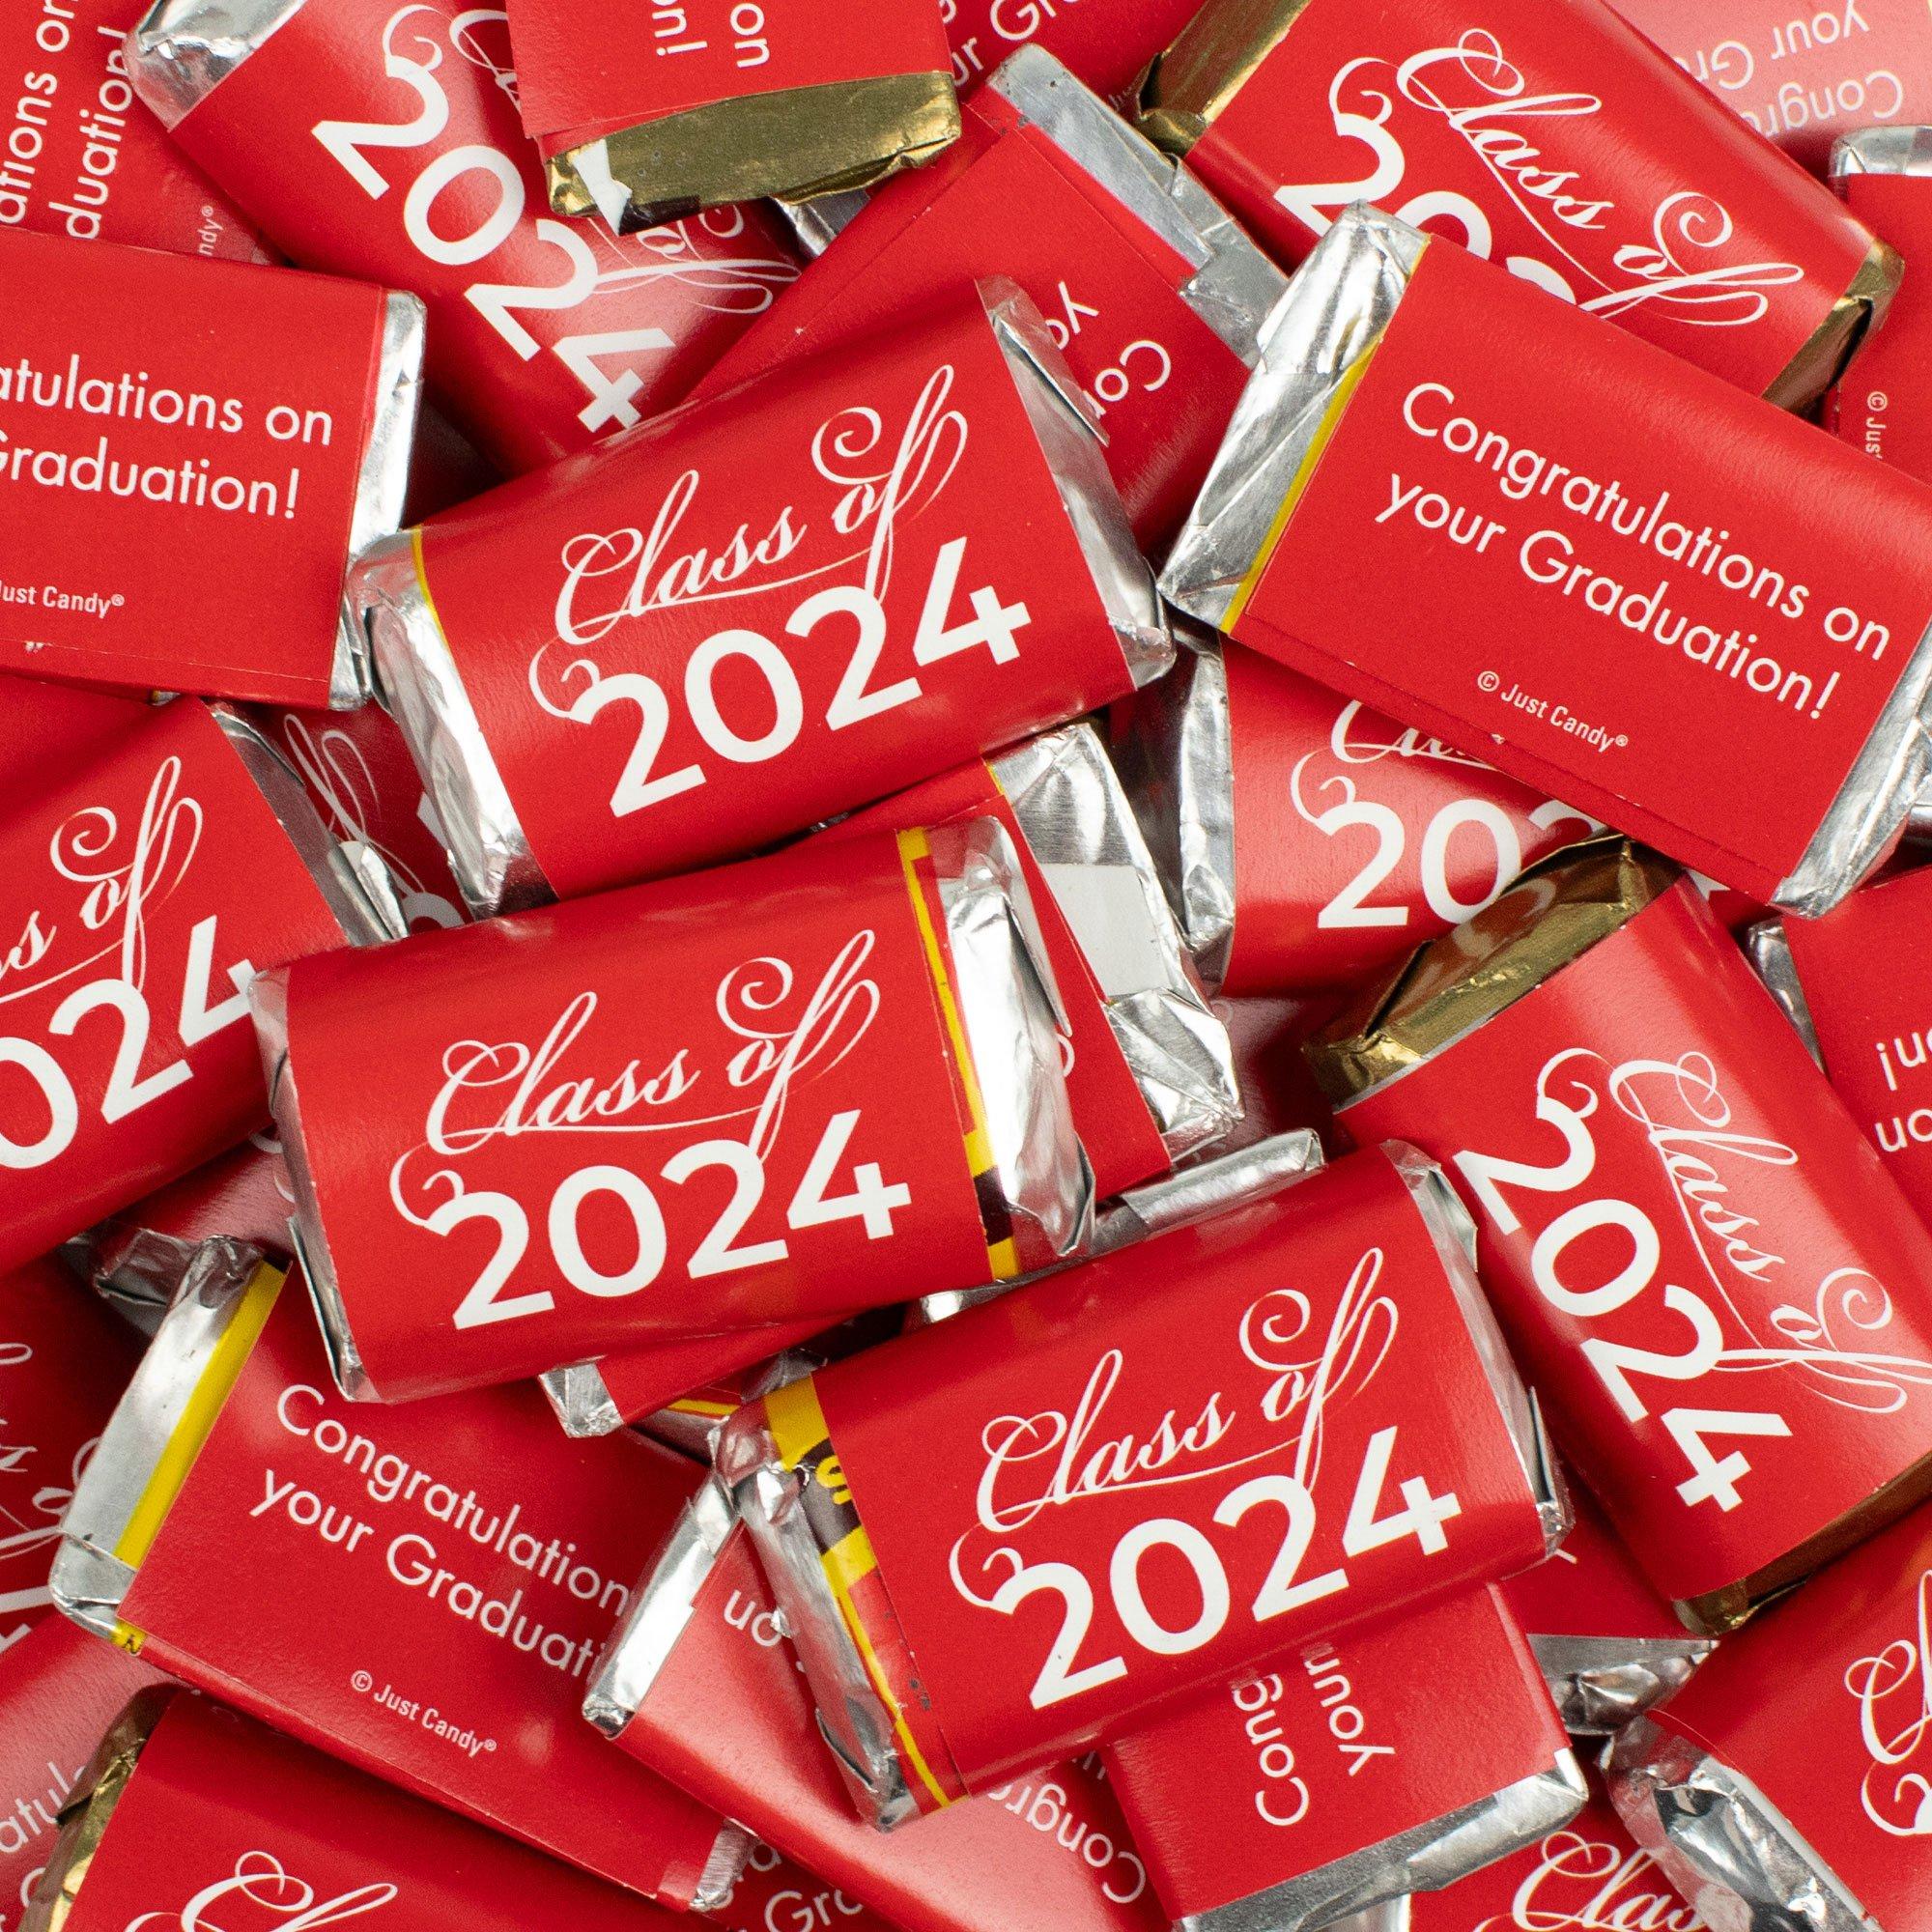 Red Class of 2024 Graduation Hershey's Assorted Miniatures, 12oz, 40pc